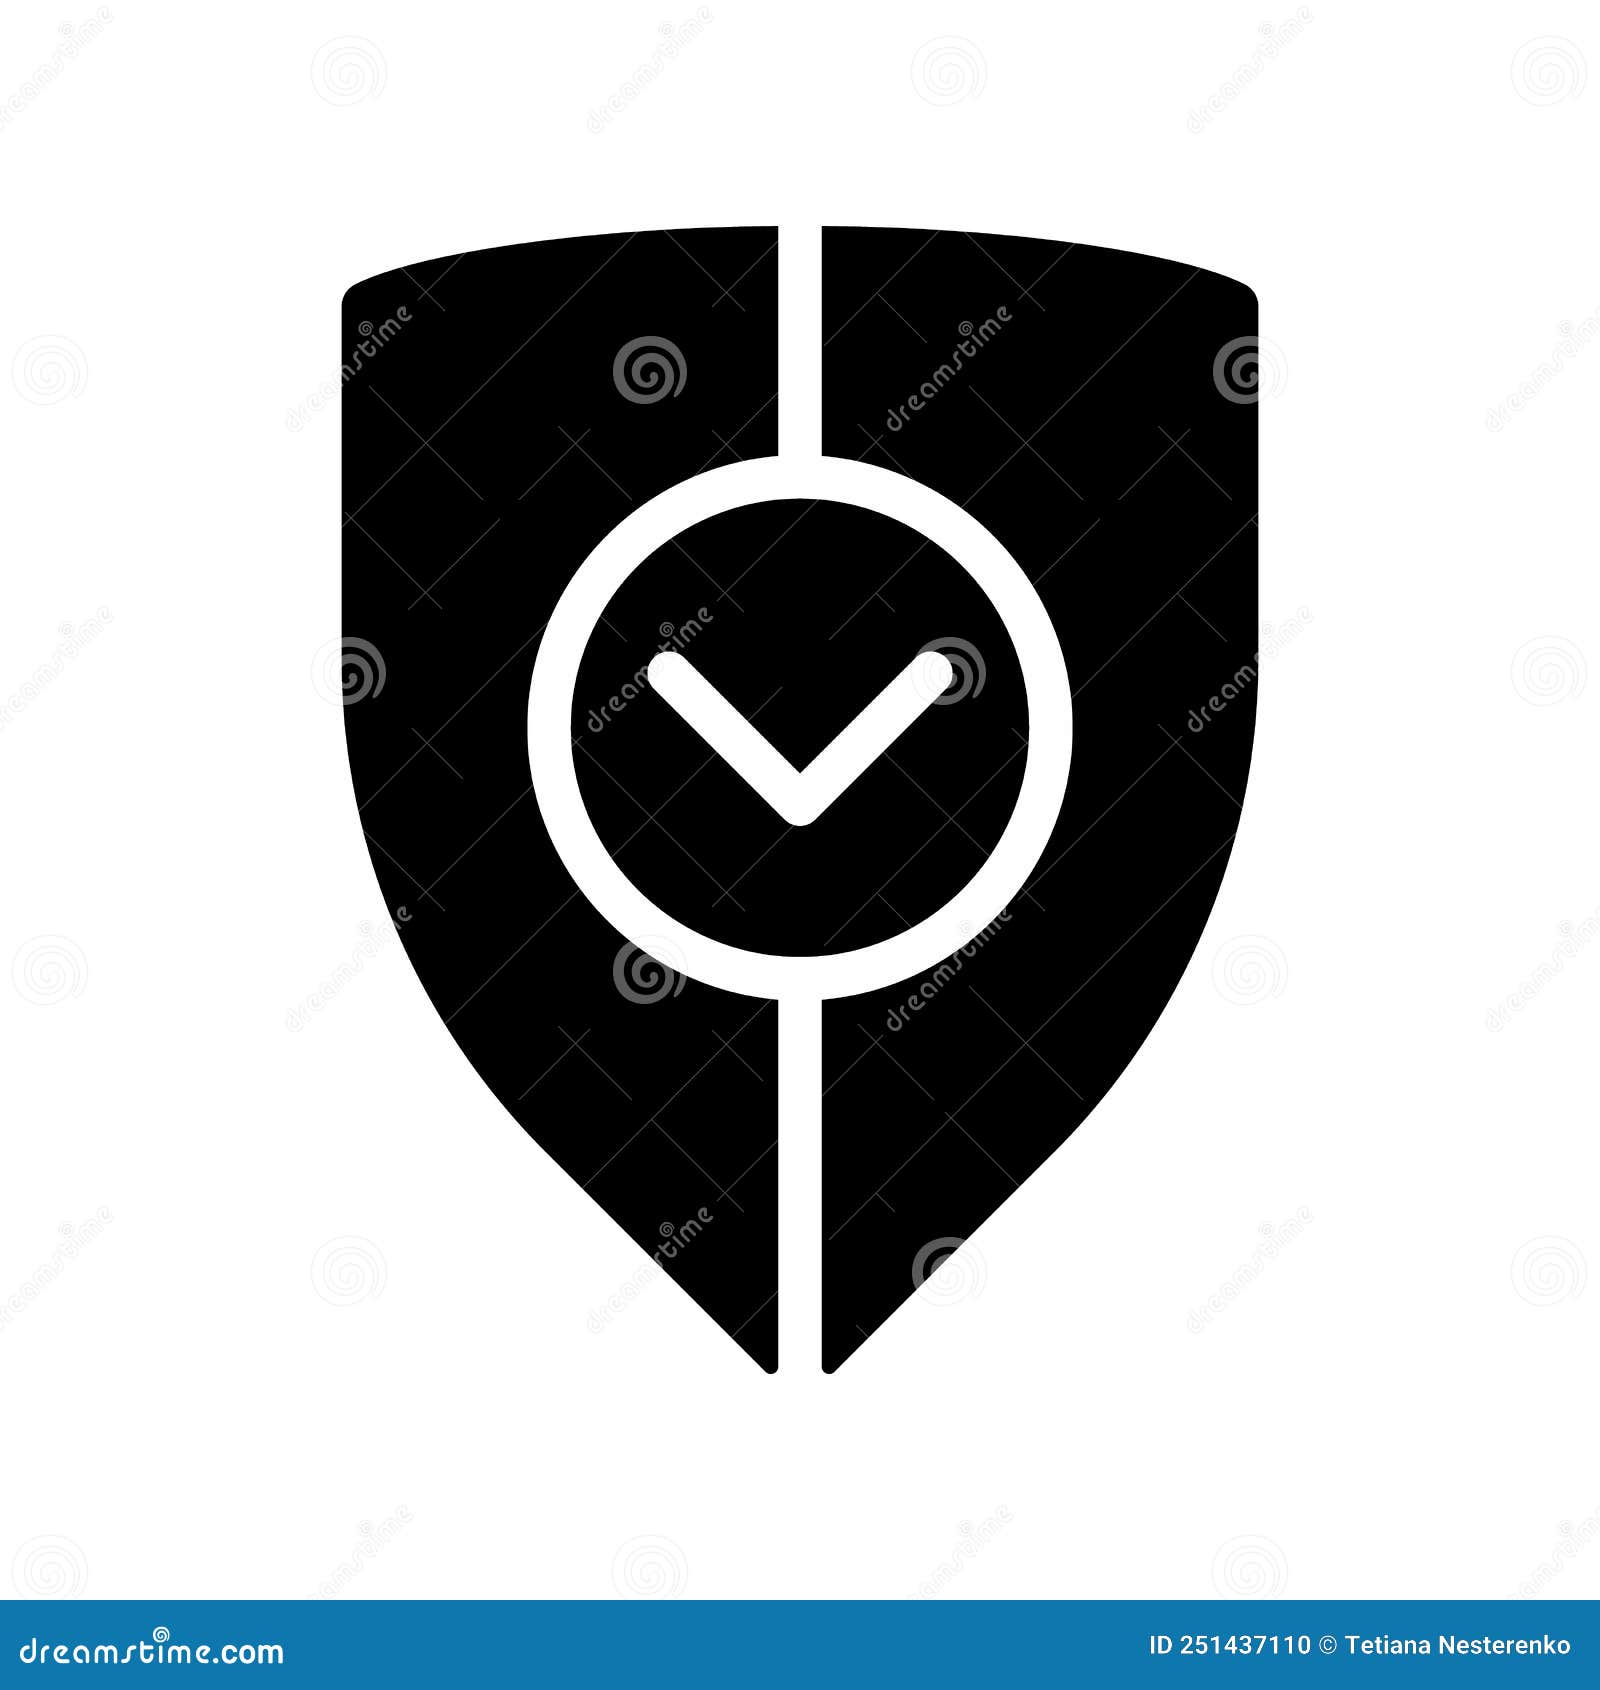 business security black glyph icon